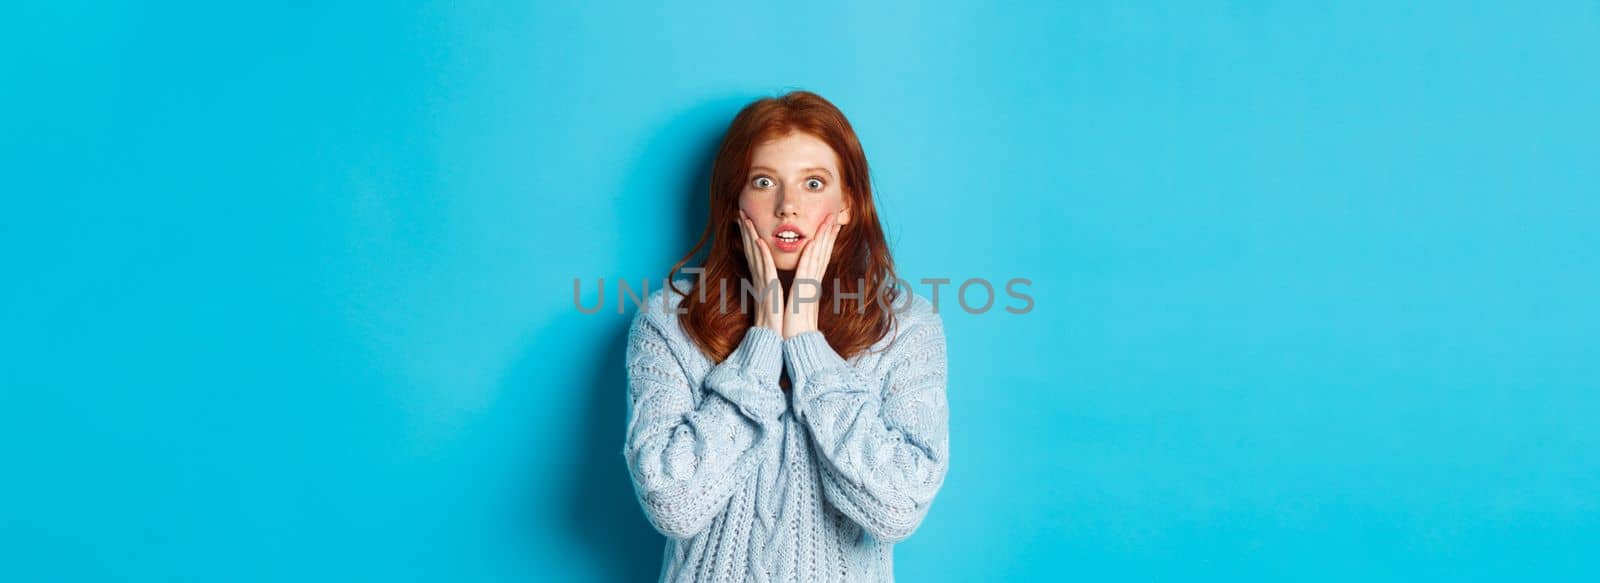 Shocked redhead girl staring at camera speechless, express disbelief and amazement, standing in sweater against blue background.